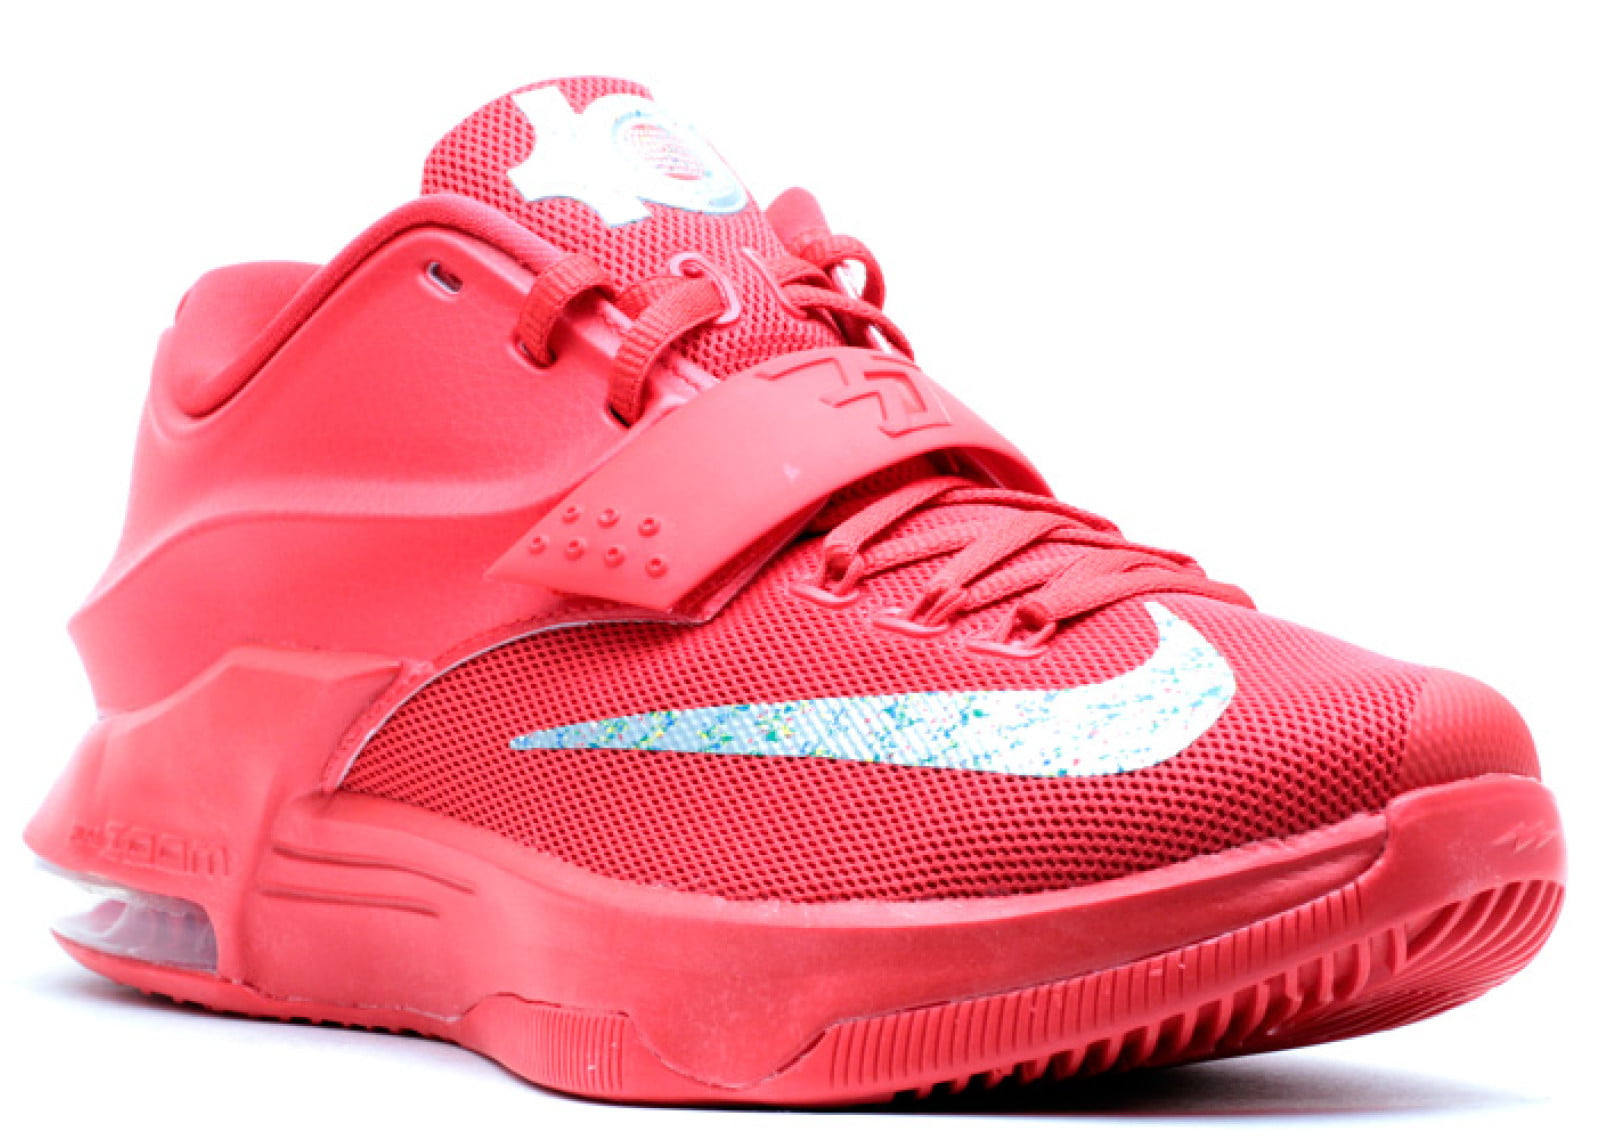 kevin durant shoes canada